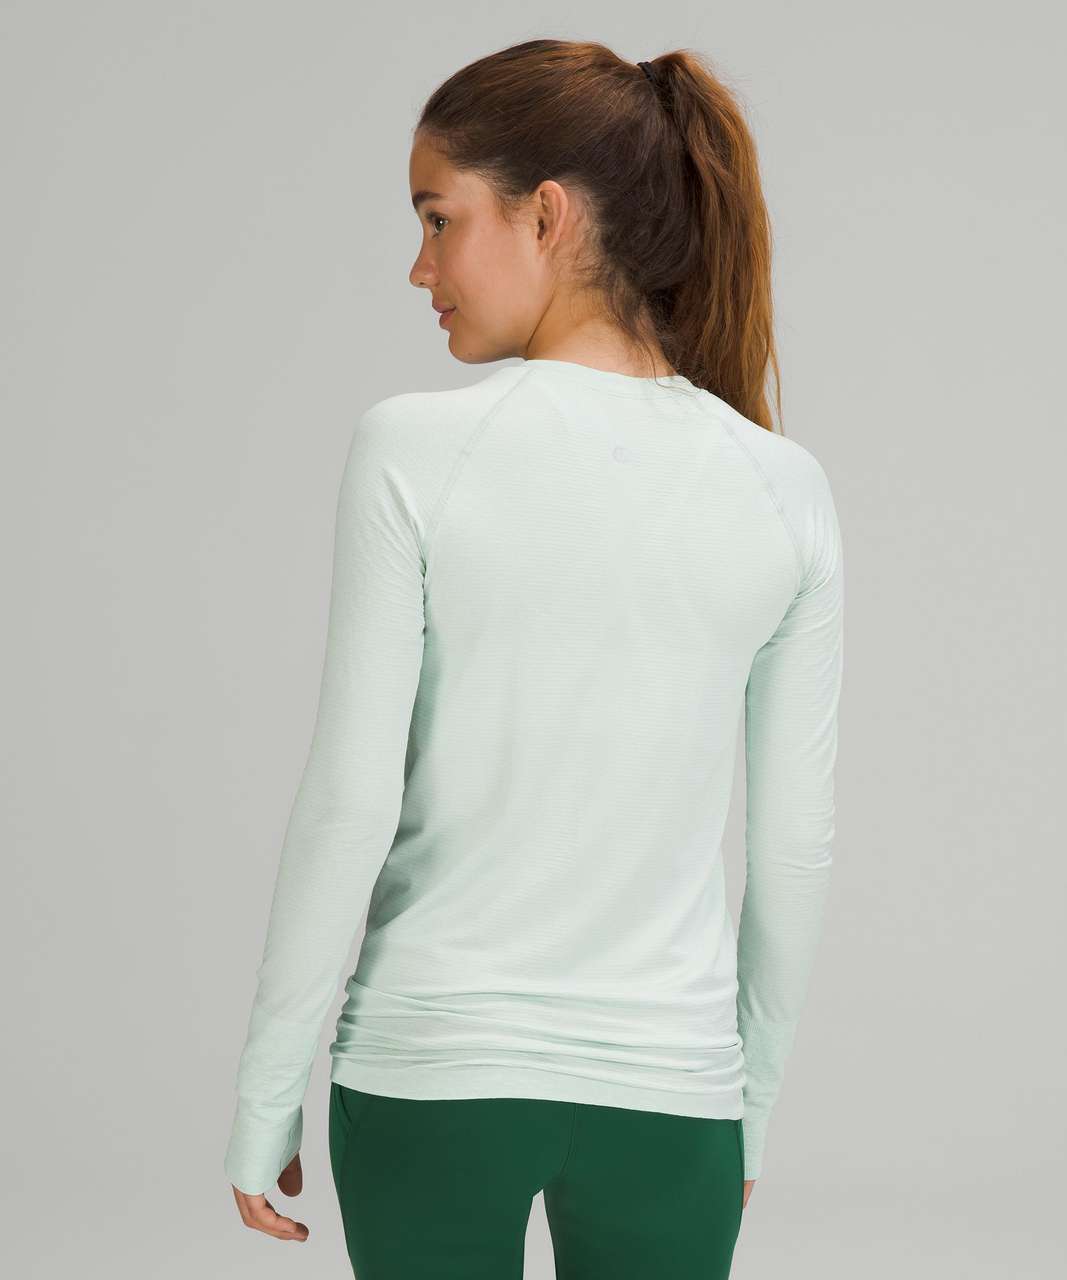 Lululemon Swiftly Tech Long Sleeve Shirt 2.0 - Distorted Static Delicate Mint / White